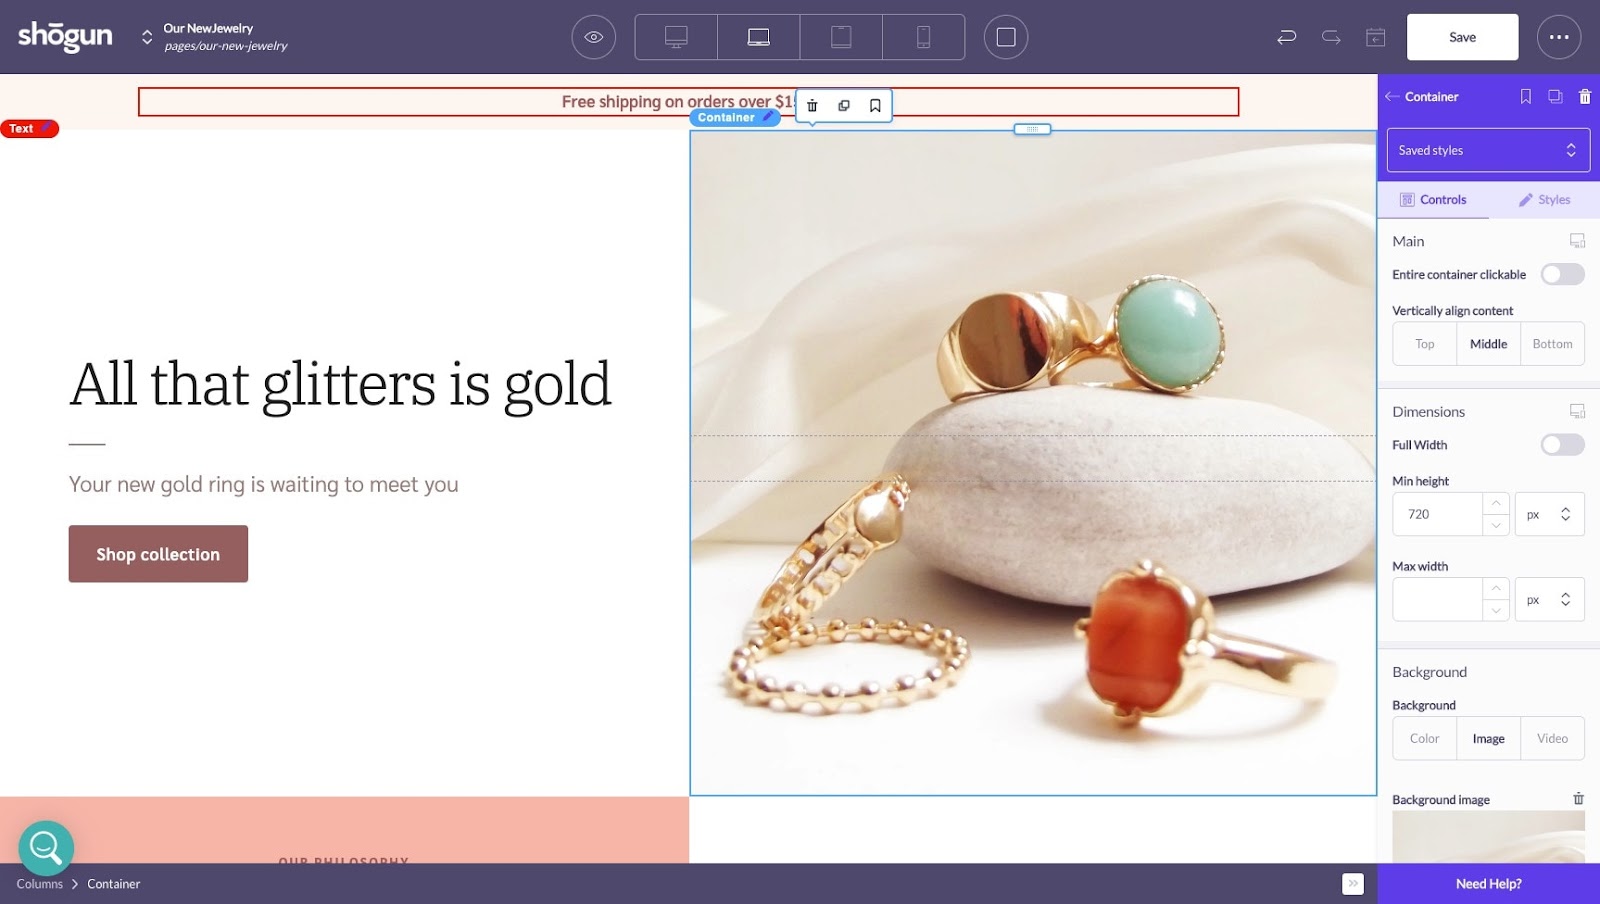 shogun page builder jewelry landing page example